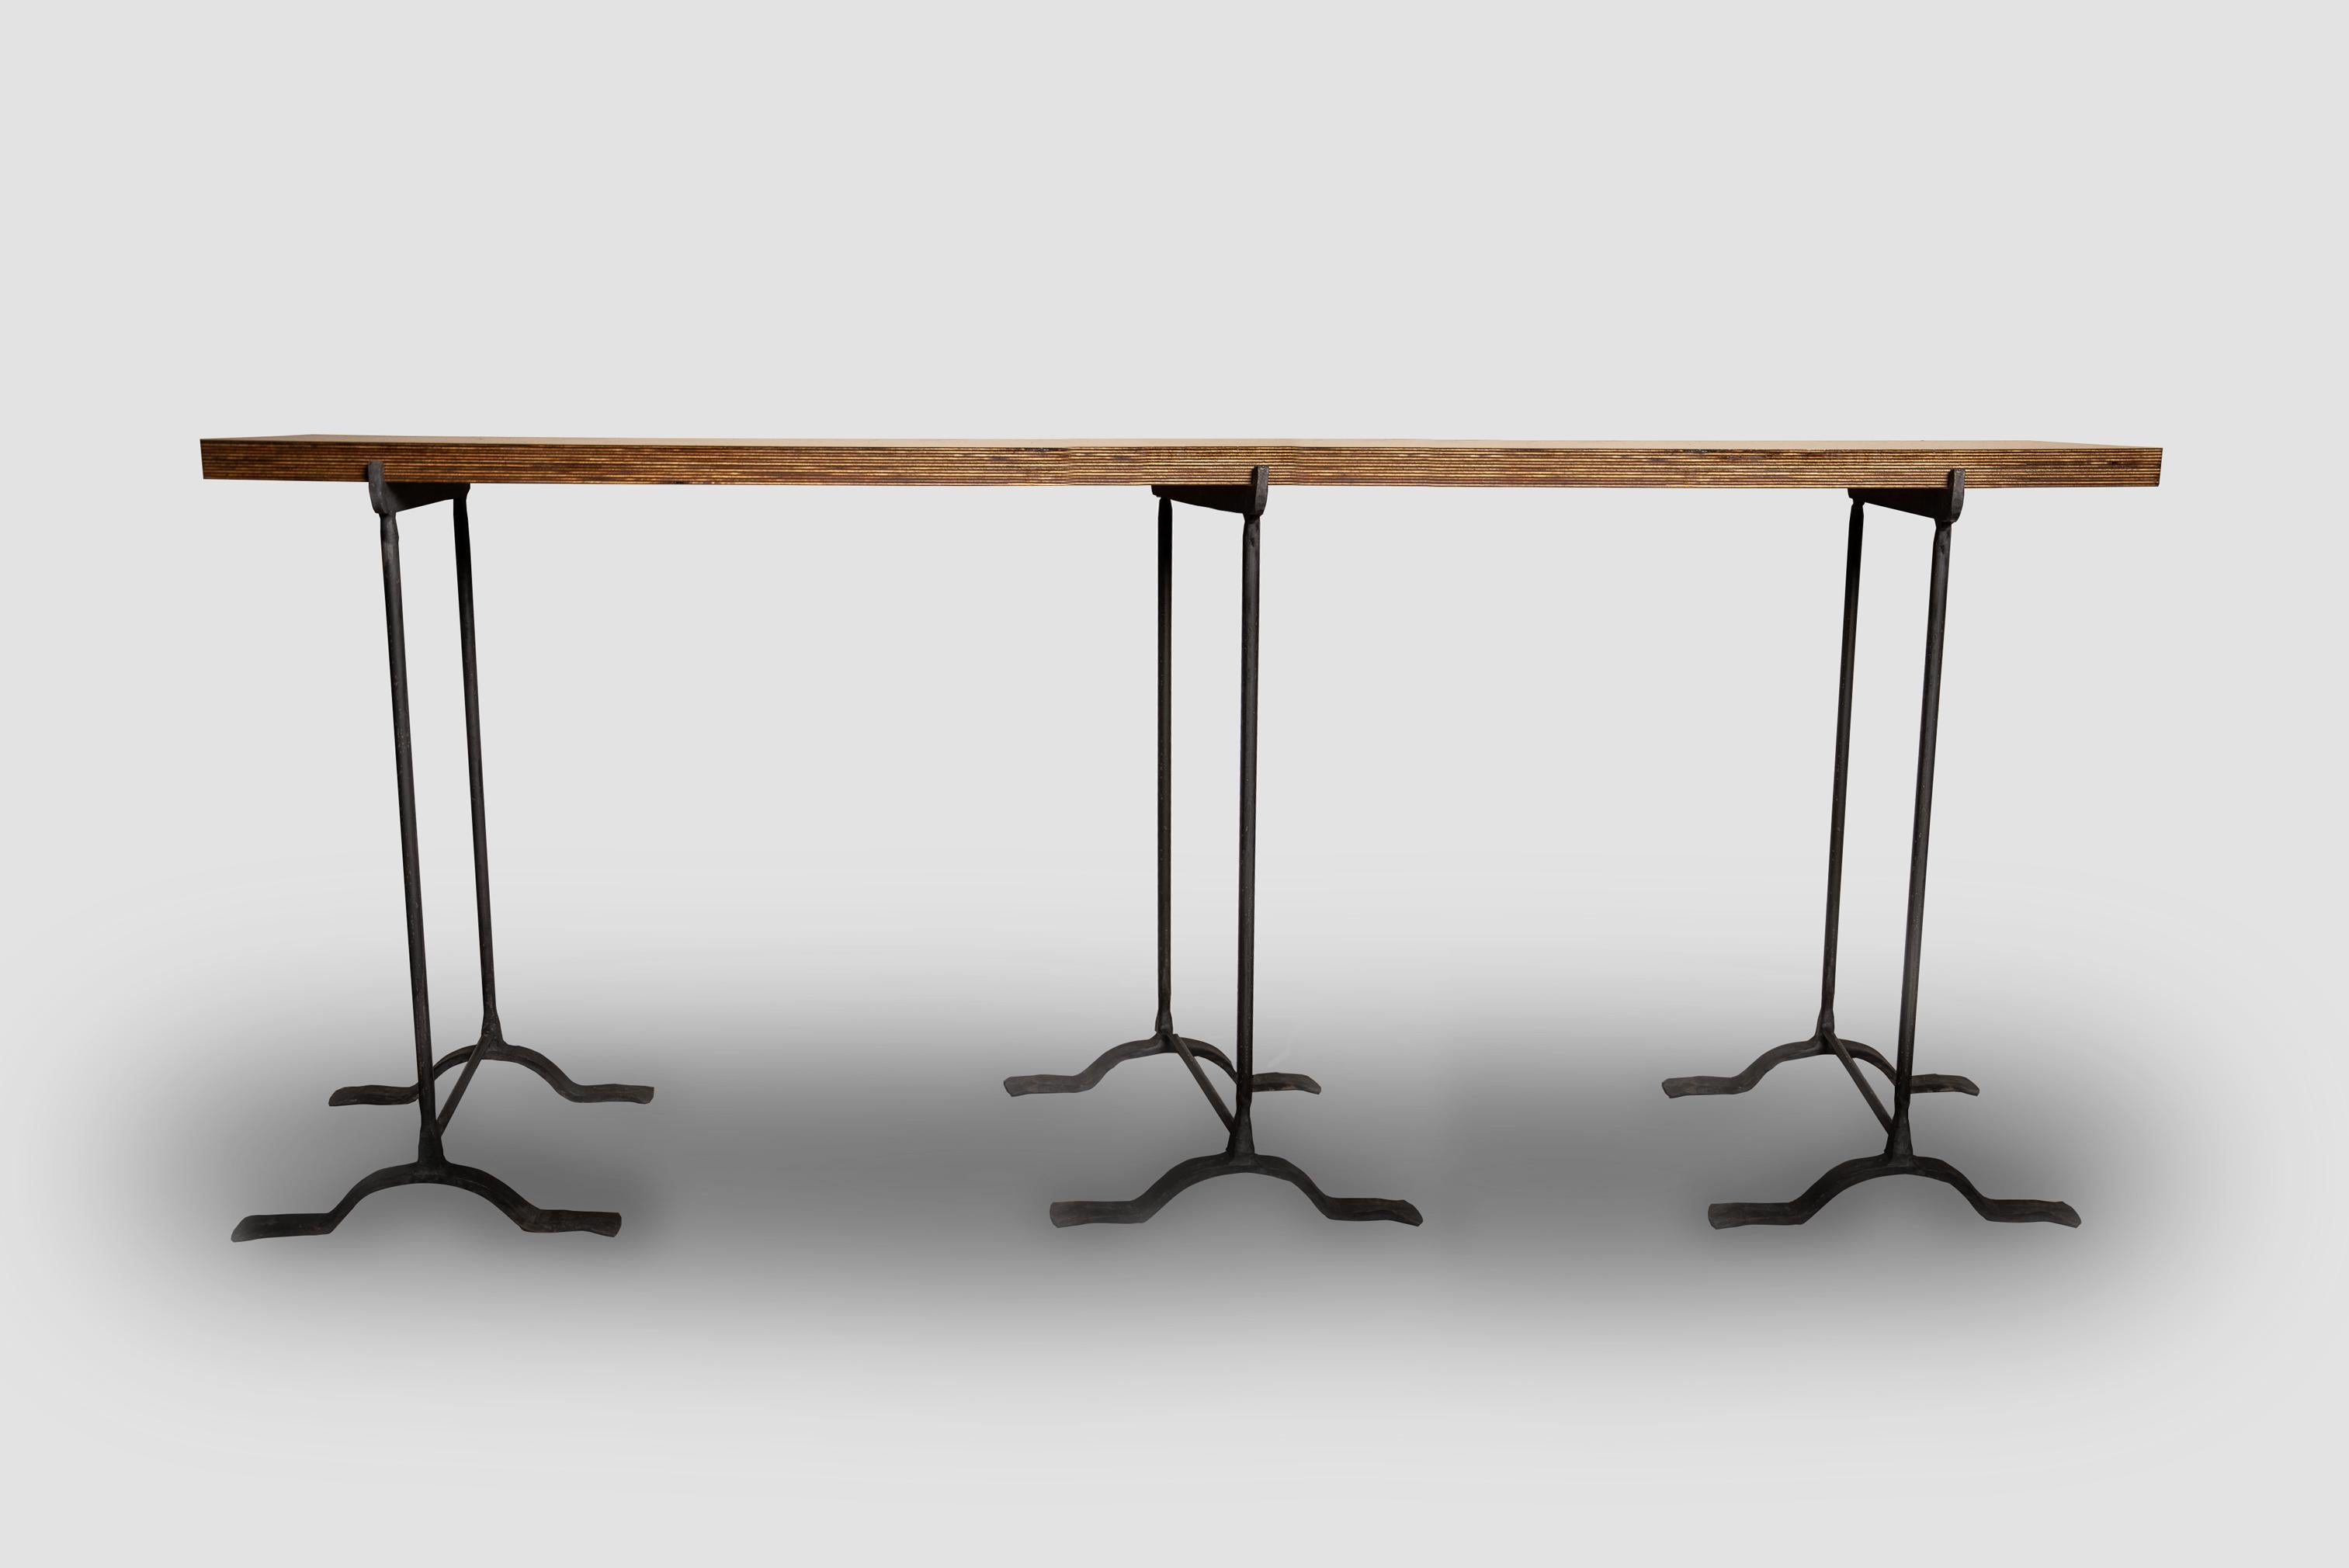 Forged Console Table Design by Toad Gallery London - hand crafted and scalable For Sale